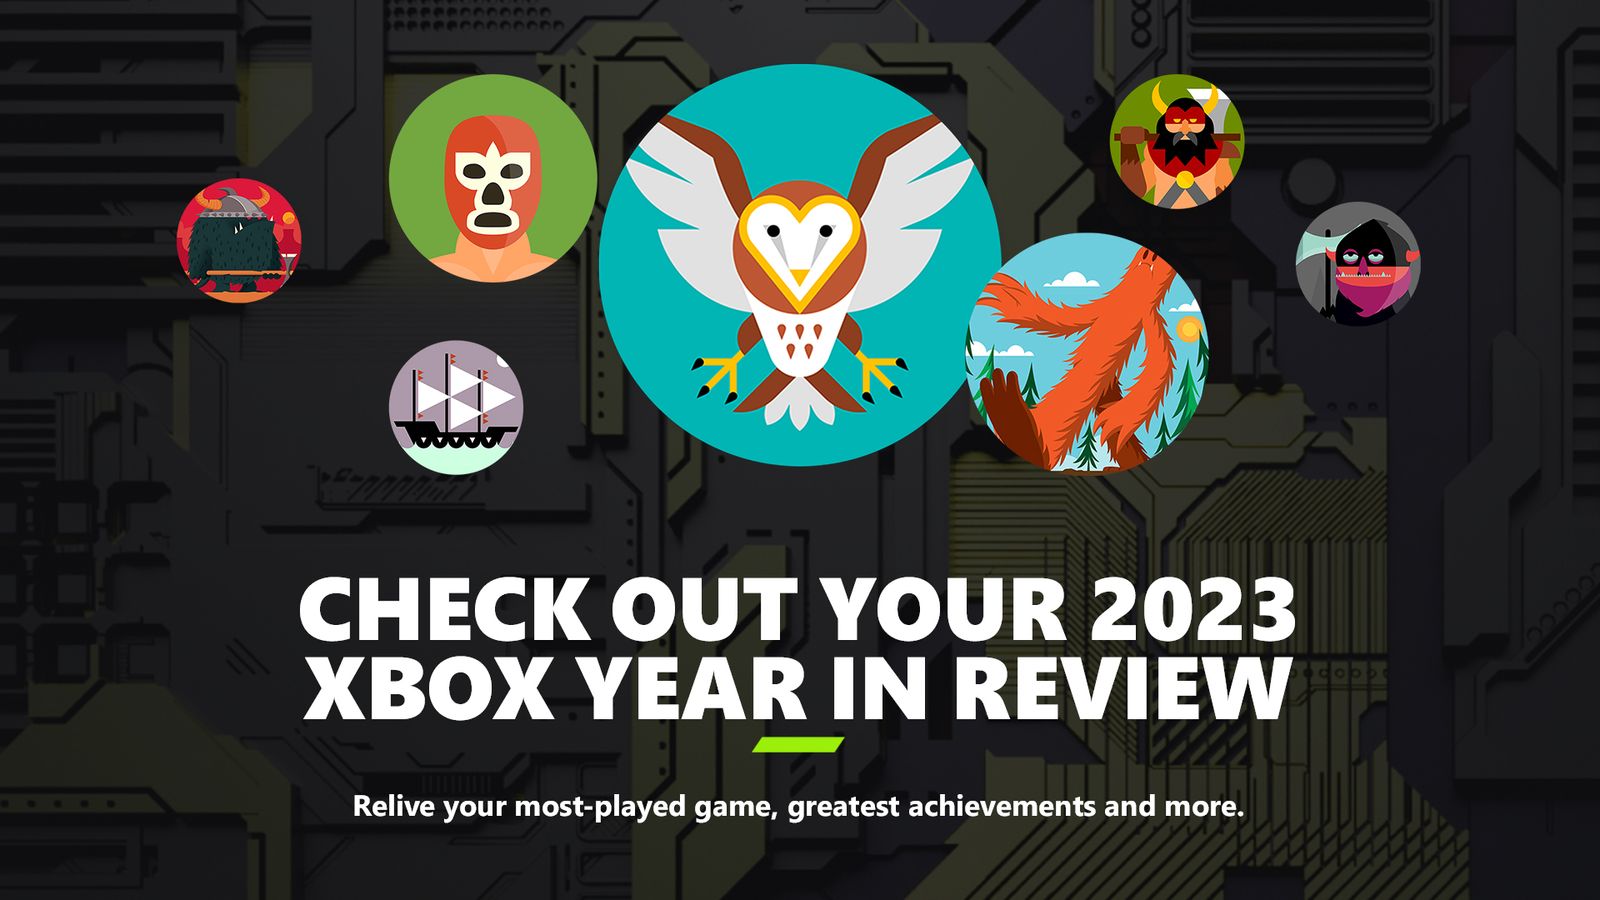 Official Microsoft art promoting their Year in Review initiative 